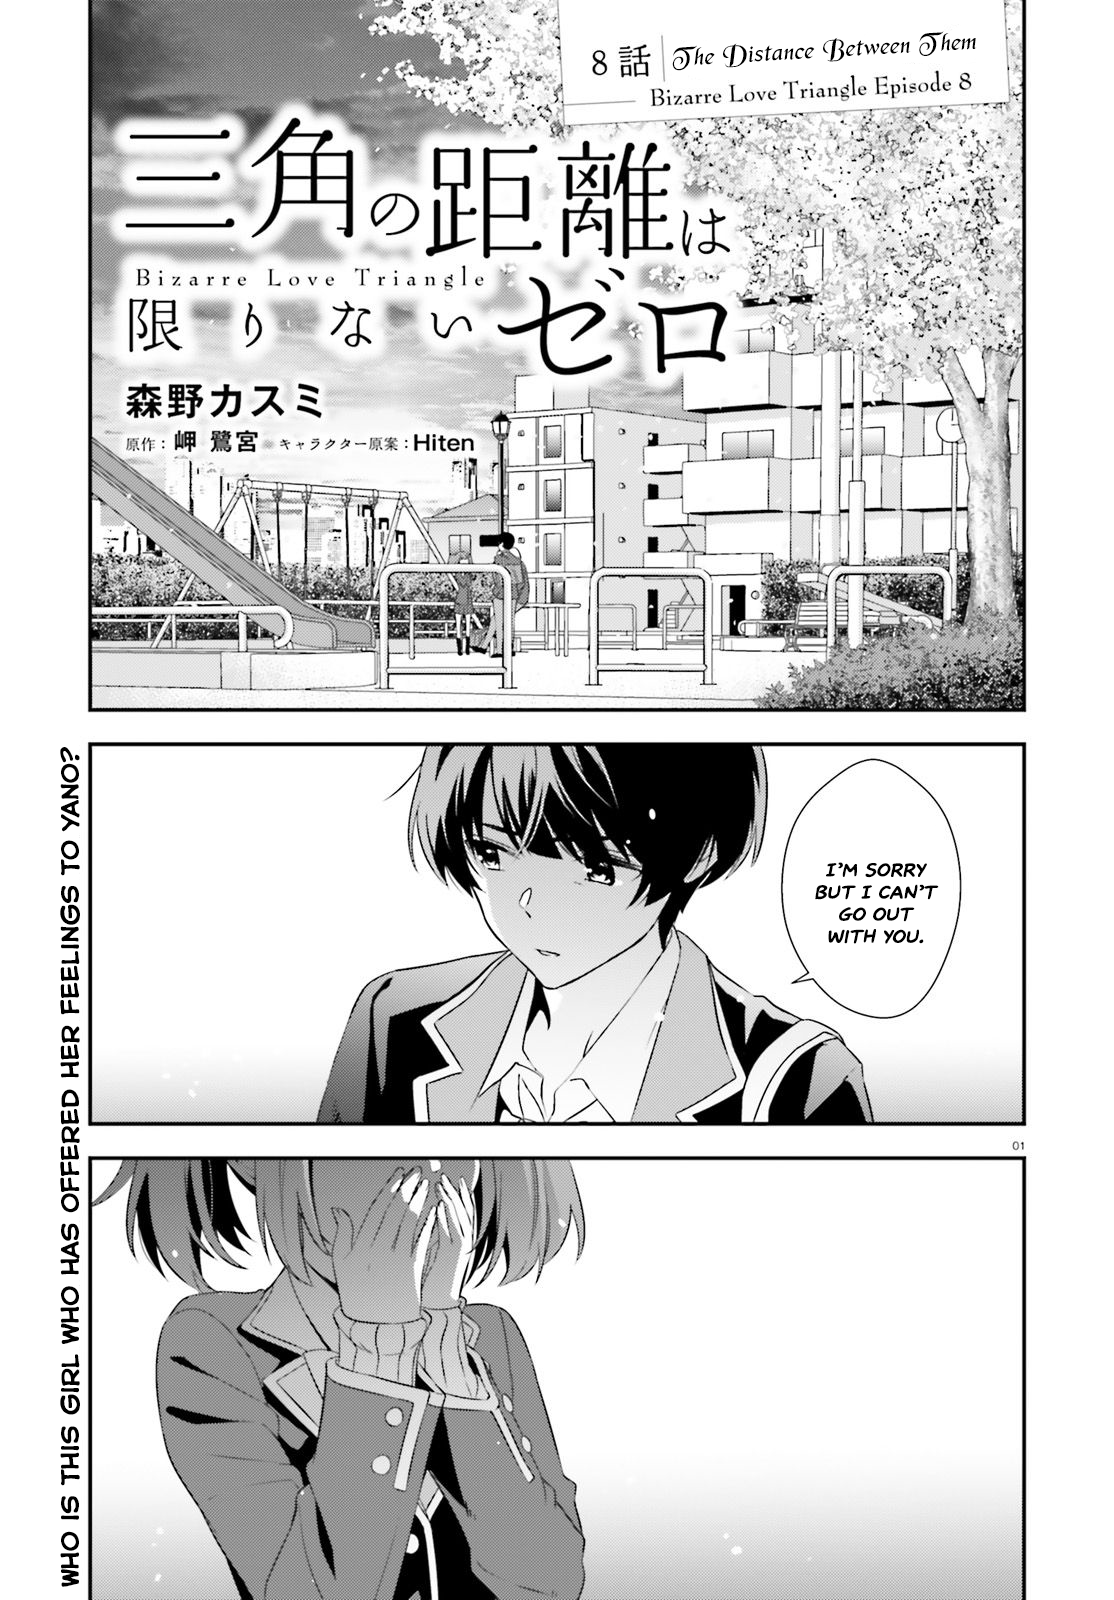 Bizarre Love Triangle Vol.2 Chapter 8: The Distance Between Them - Picture 2